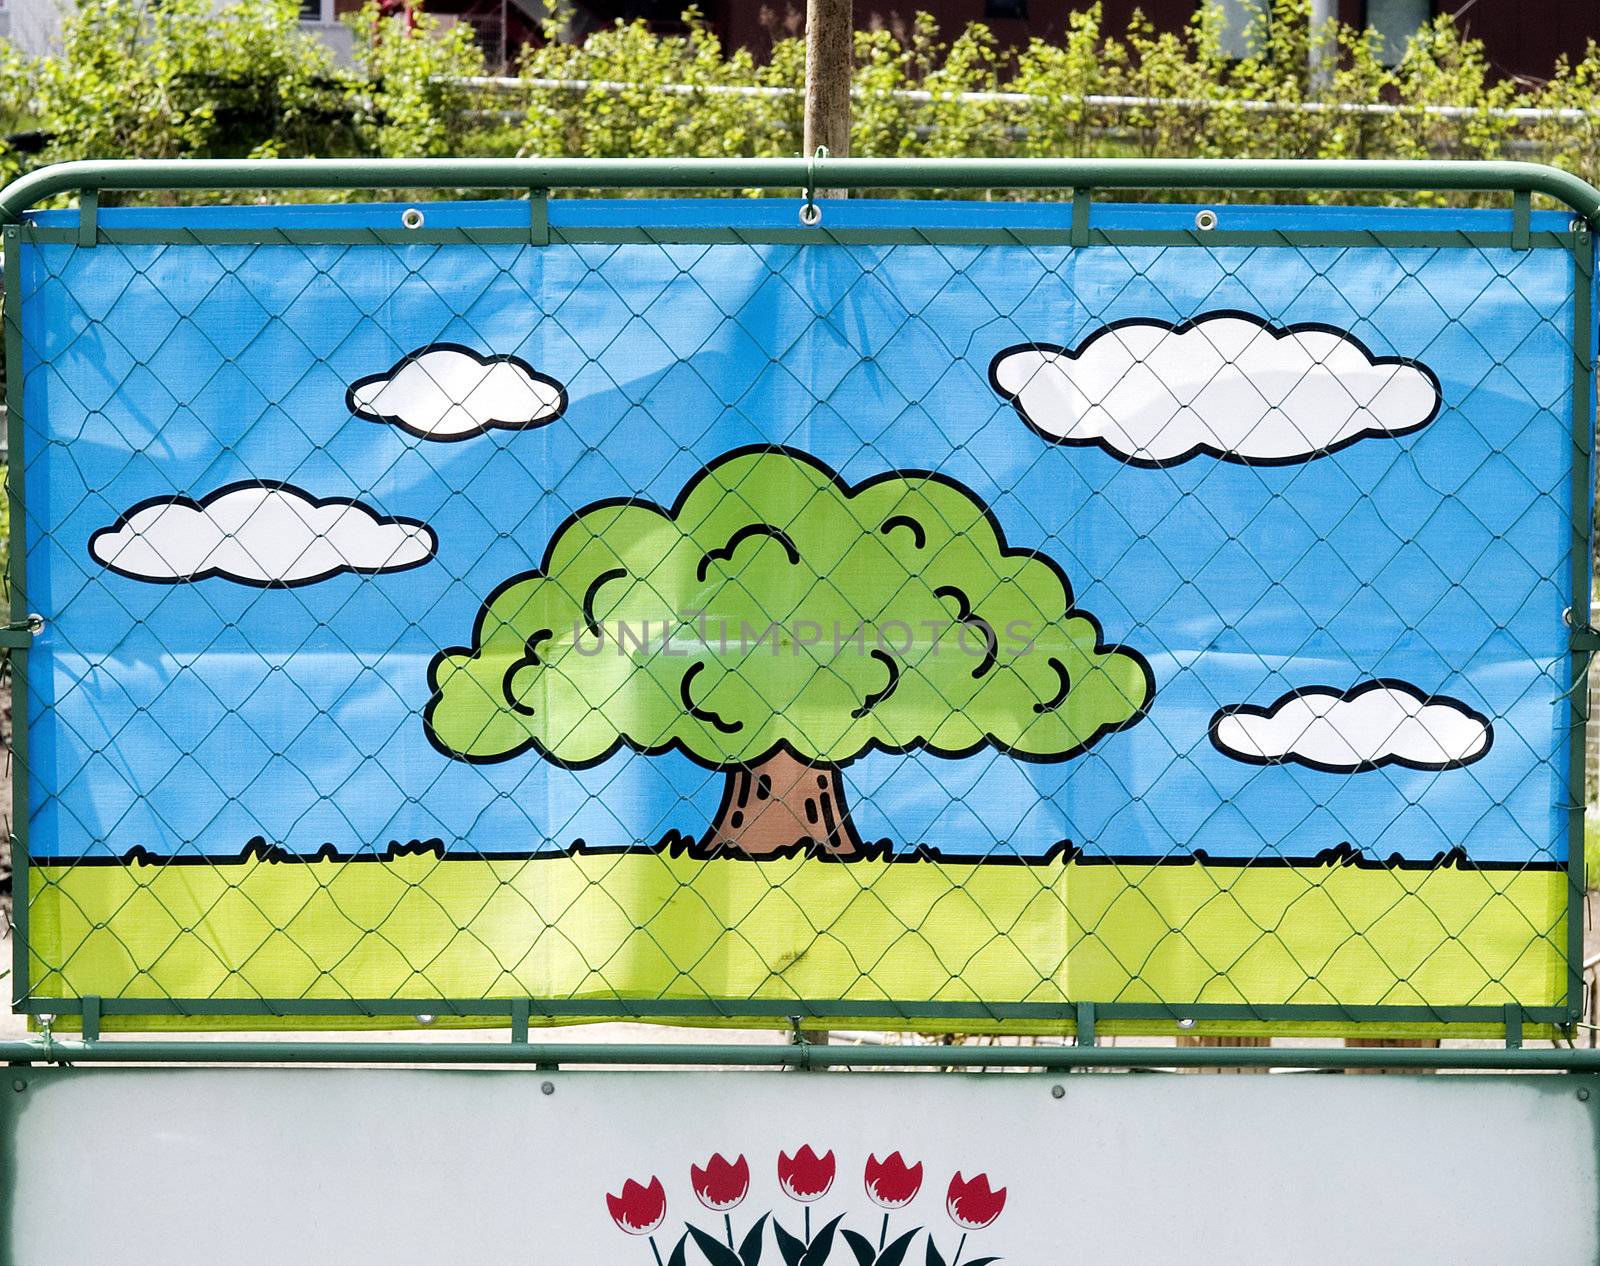 decorative colorful cartoon image on building site fence in tokyo japan